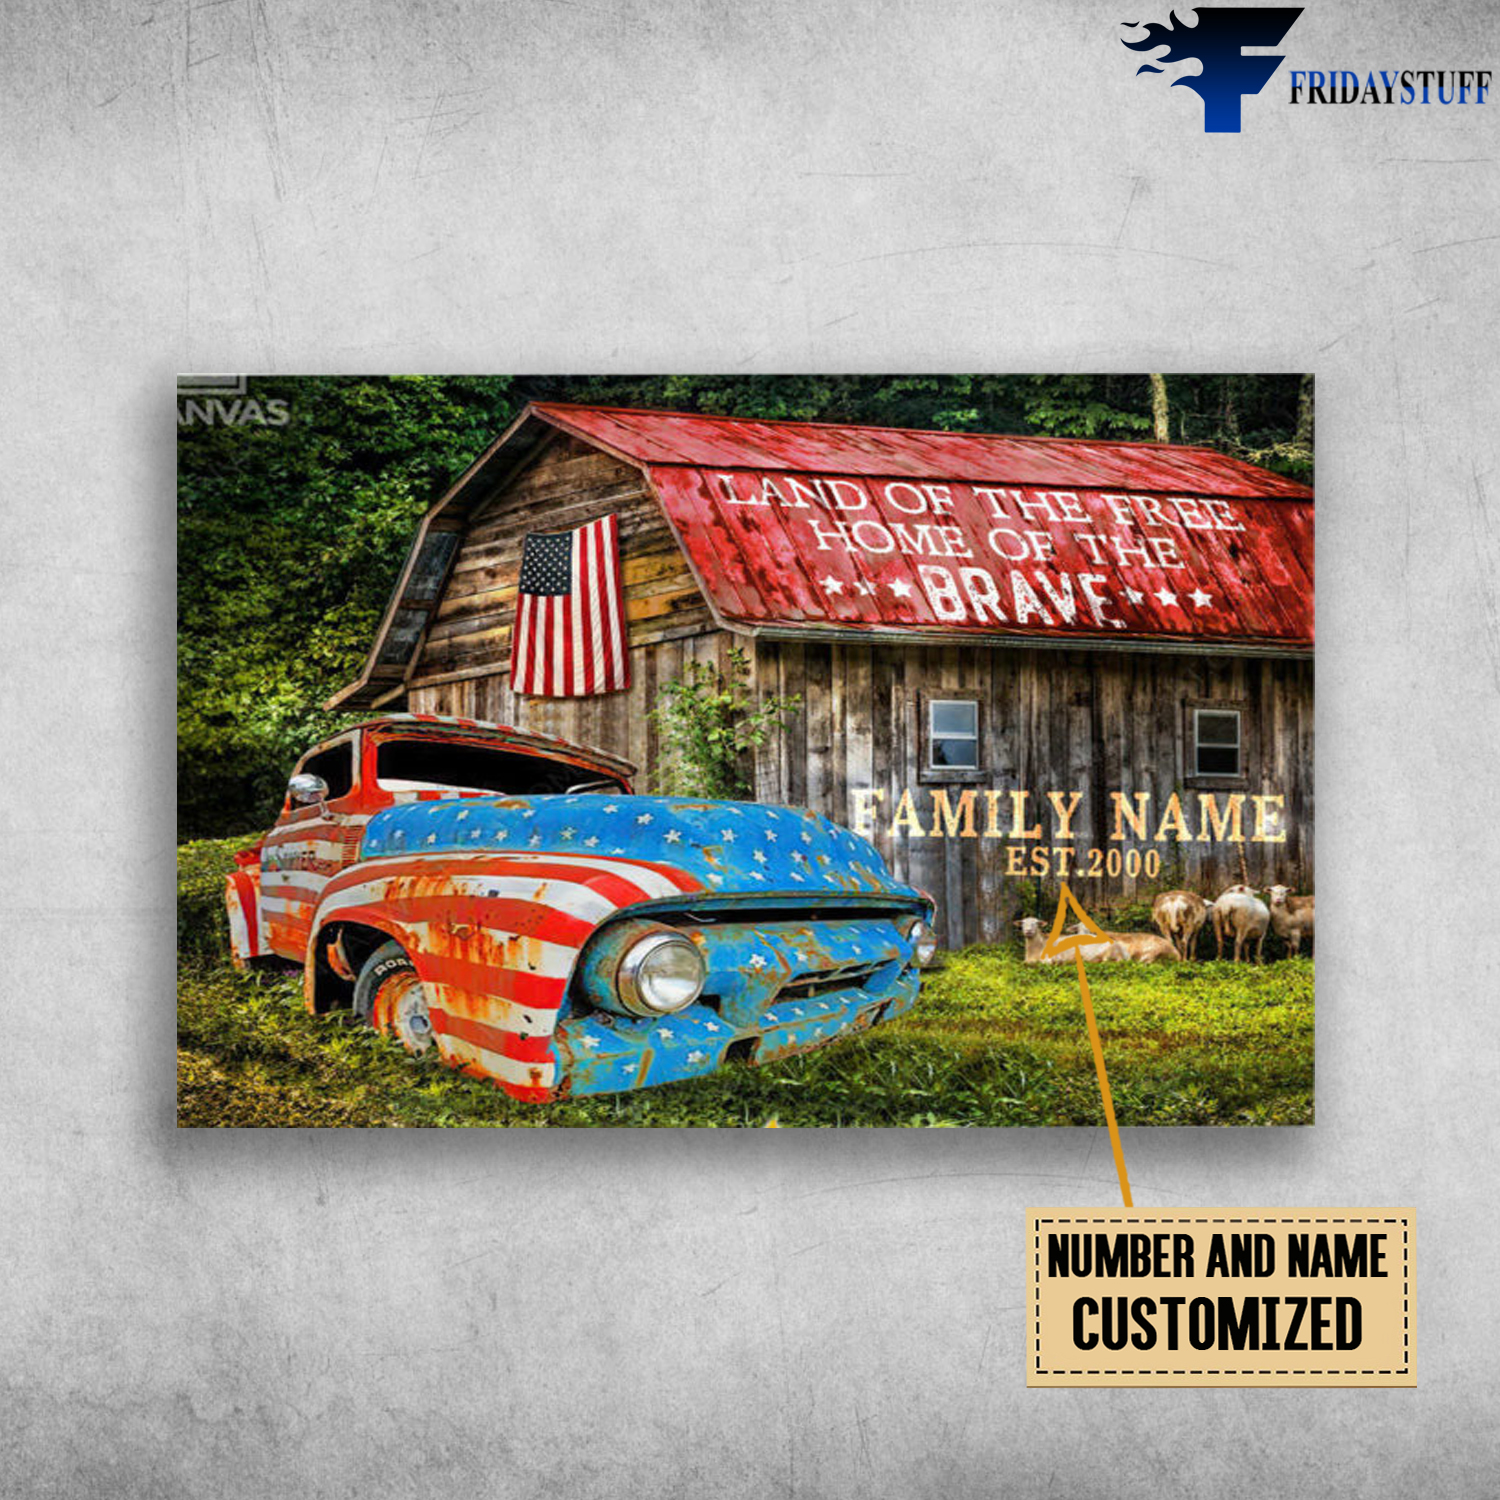 Amerian Family, American Truck, Land Of The Free, Home Of The Brave, American Farmhouse